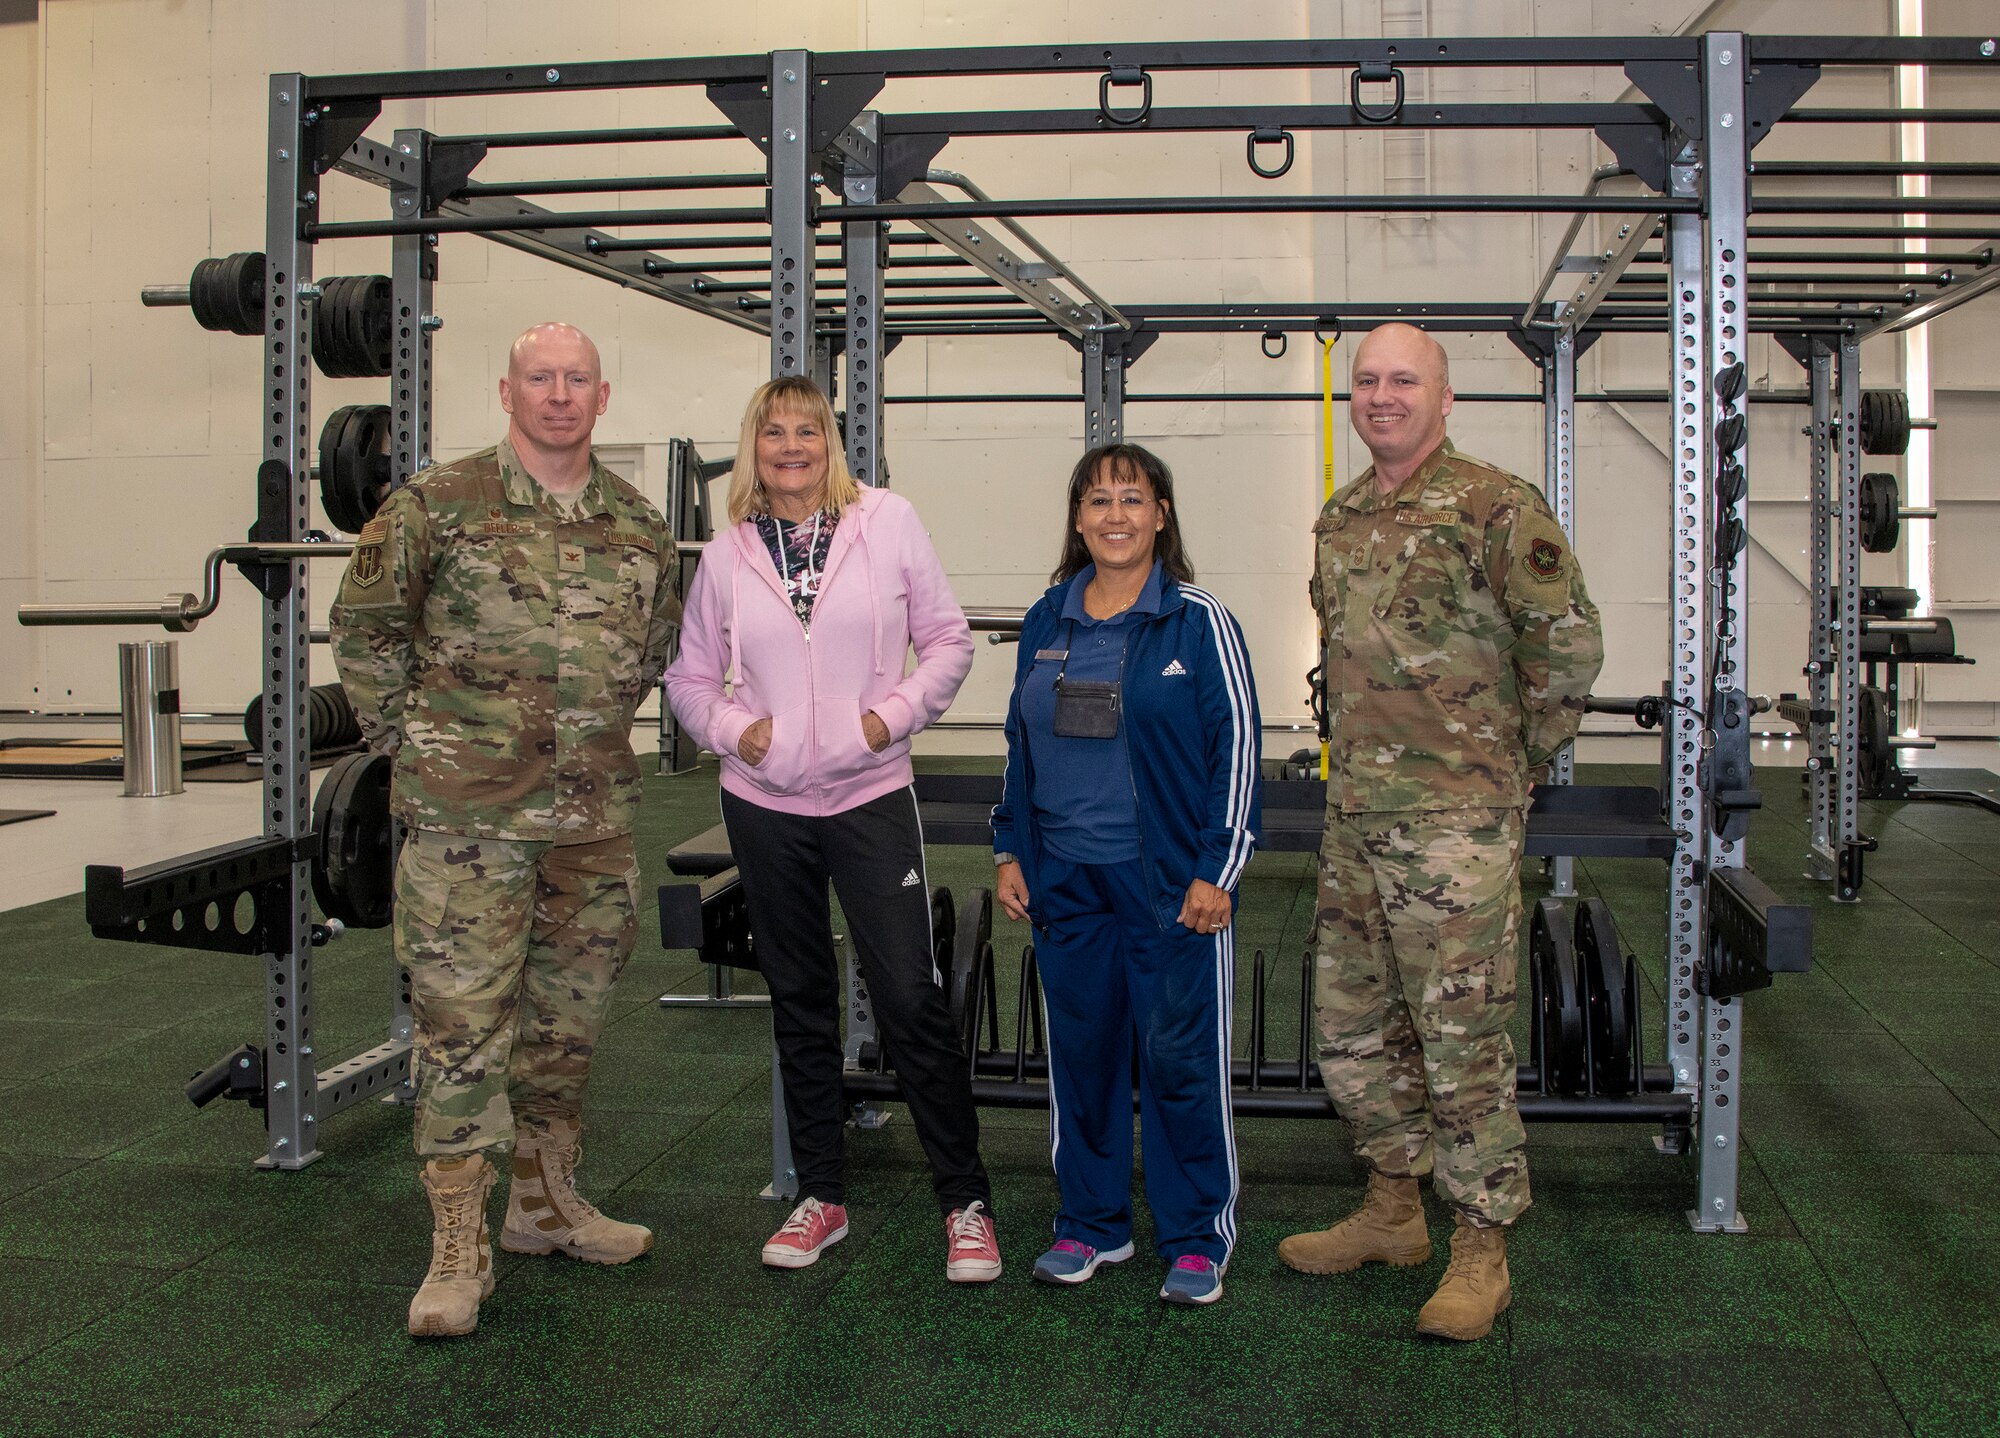 From left to right, U.S. Air Force Col. Victor Beeler, 60th Mission Support Group, commander, Barbara Green, programs director, and Tanya McCormick, fitness and sports director, both with the 60th Force Support Squadron and Chief Master Sgt. Matthew Pulsipher, 60th MSG interim superintendent, stand inside the Nose Dock Gym Oct. 11, 2019, at Travis Air Force Base, California. The new gym at Building 844 was facilitated through existing base funds, equipment donations and volunteer work by the 60th Mission Support Group. (U.S. Air Force photo by Heide Couch)